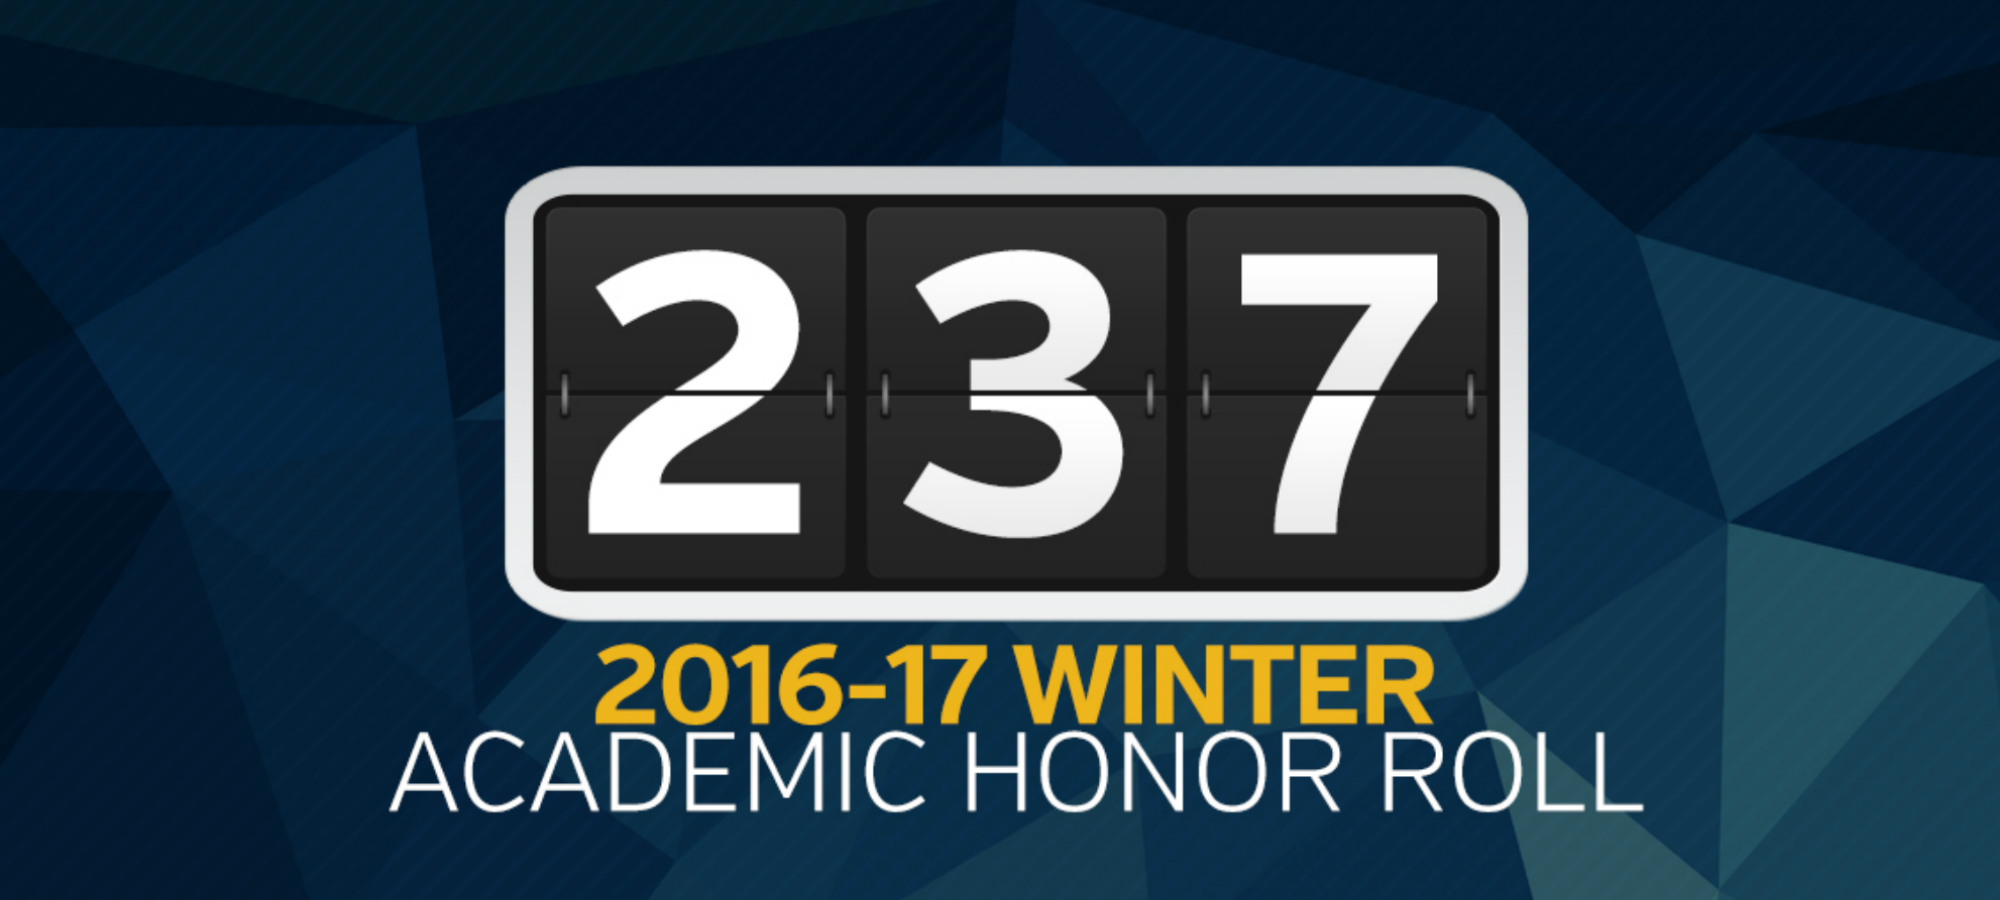 18 Crusaders tabbed on SCAC Winter Student-Athlete Academic Honor Roll